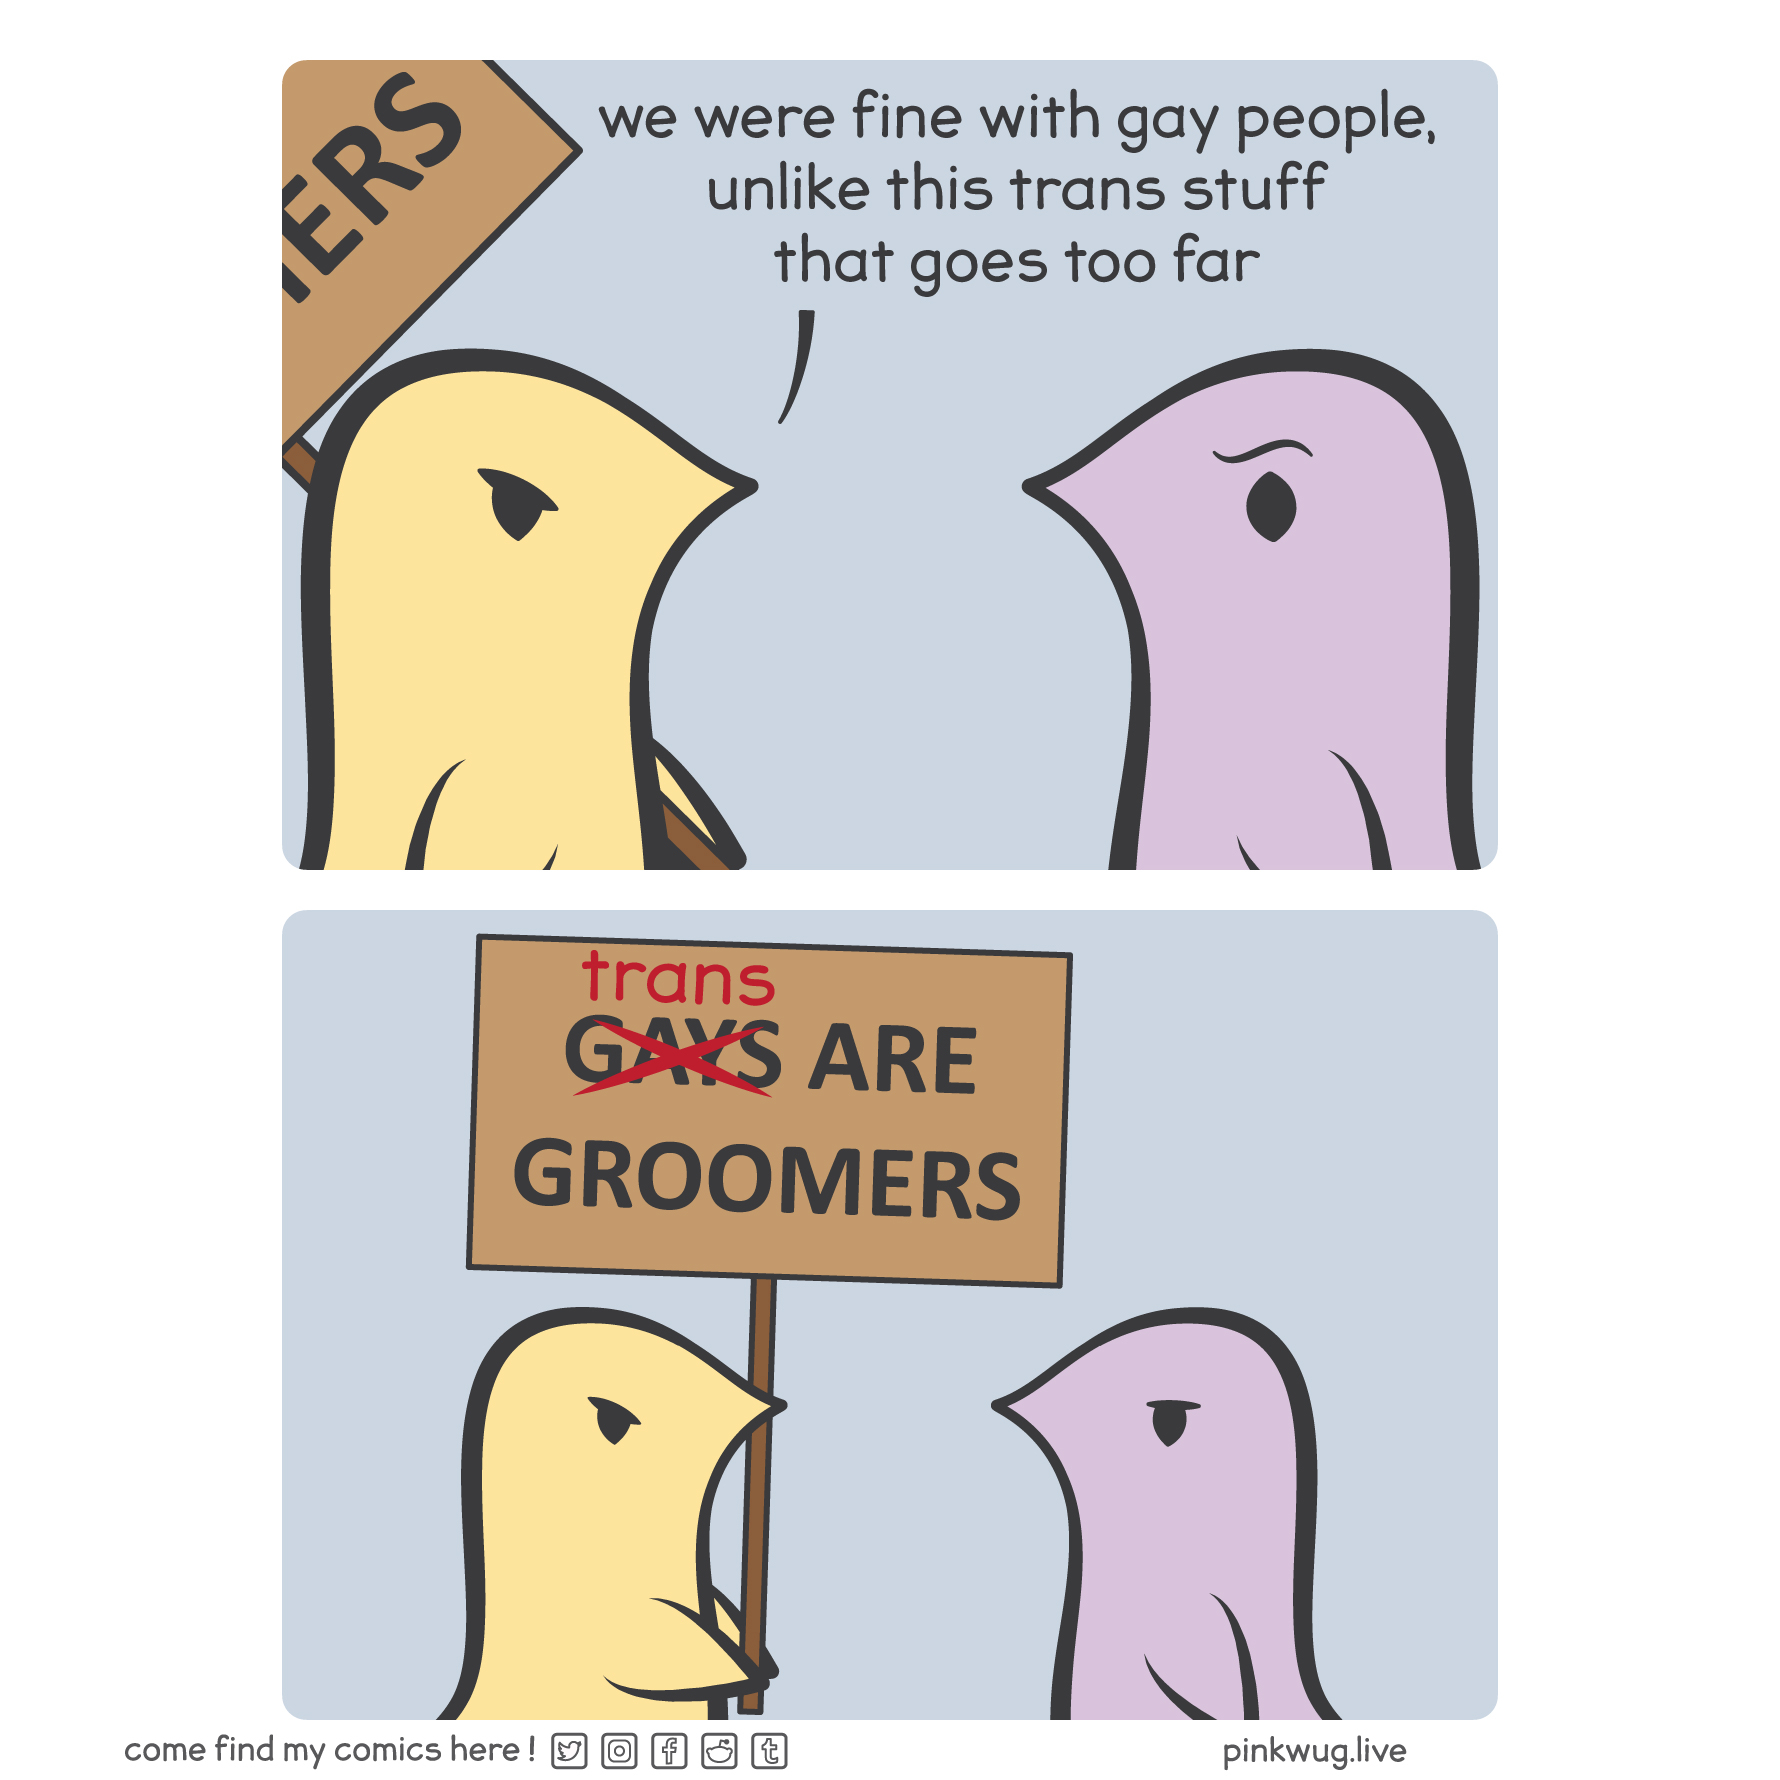 pinkwug comic: Panel 1: A yellow wug says to a purple wug: "we were fine with gay people, unlike this trans stuff that goes too far"

Panel 2: It's revealed that the yellow wug is holding a sign that says "gays are groomers" were gay crossed out and replaced with "trans"